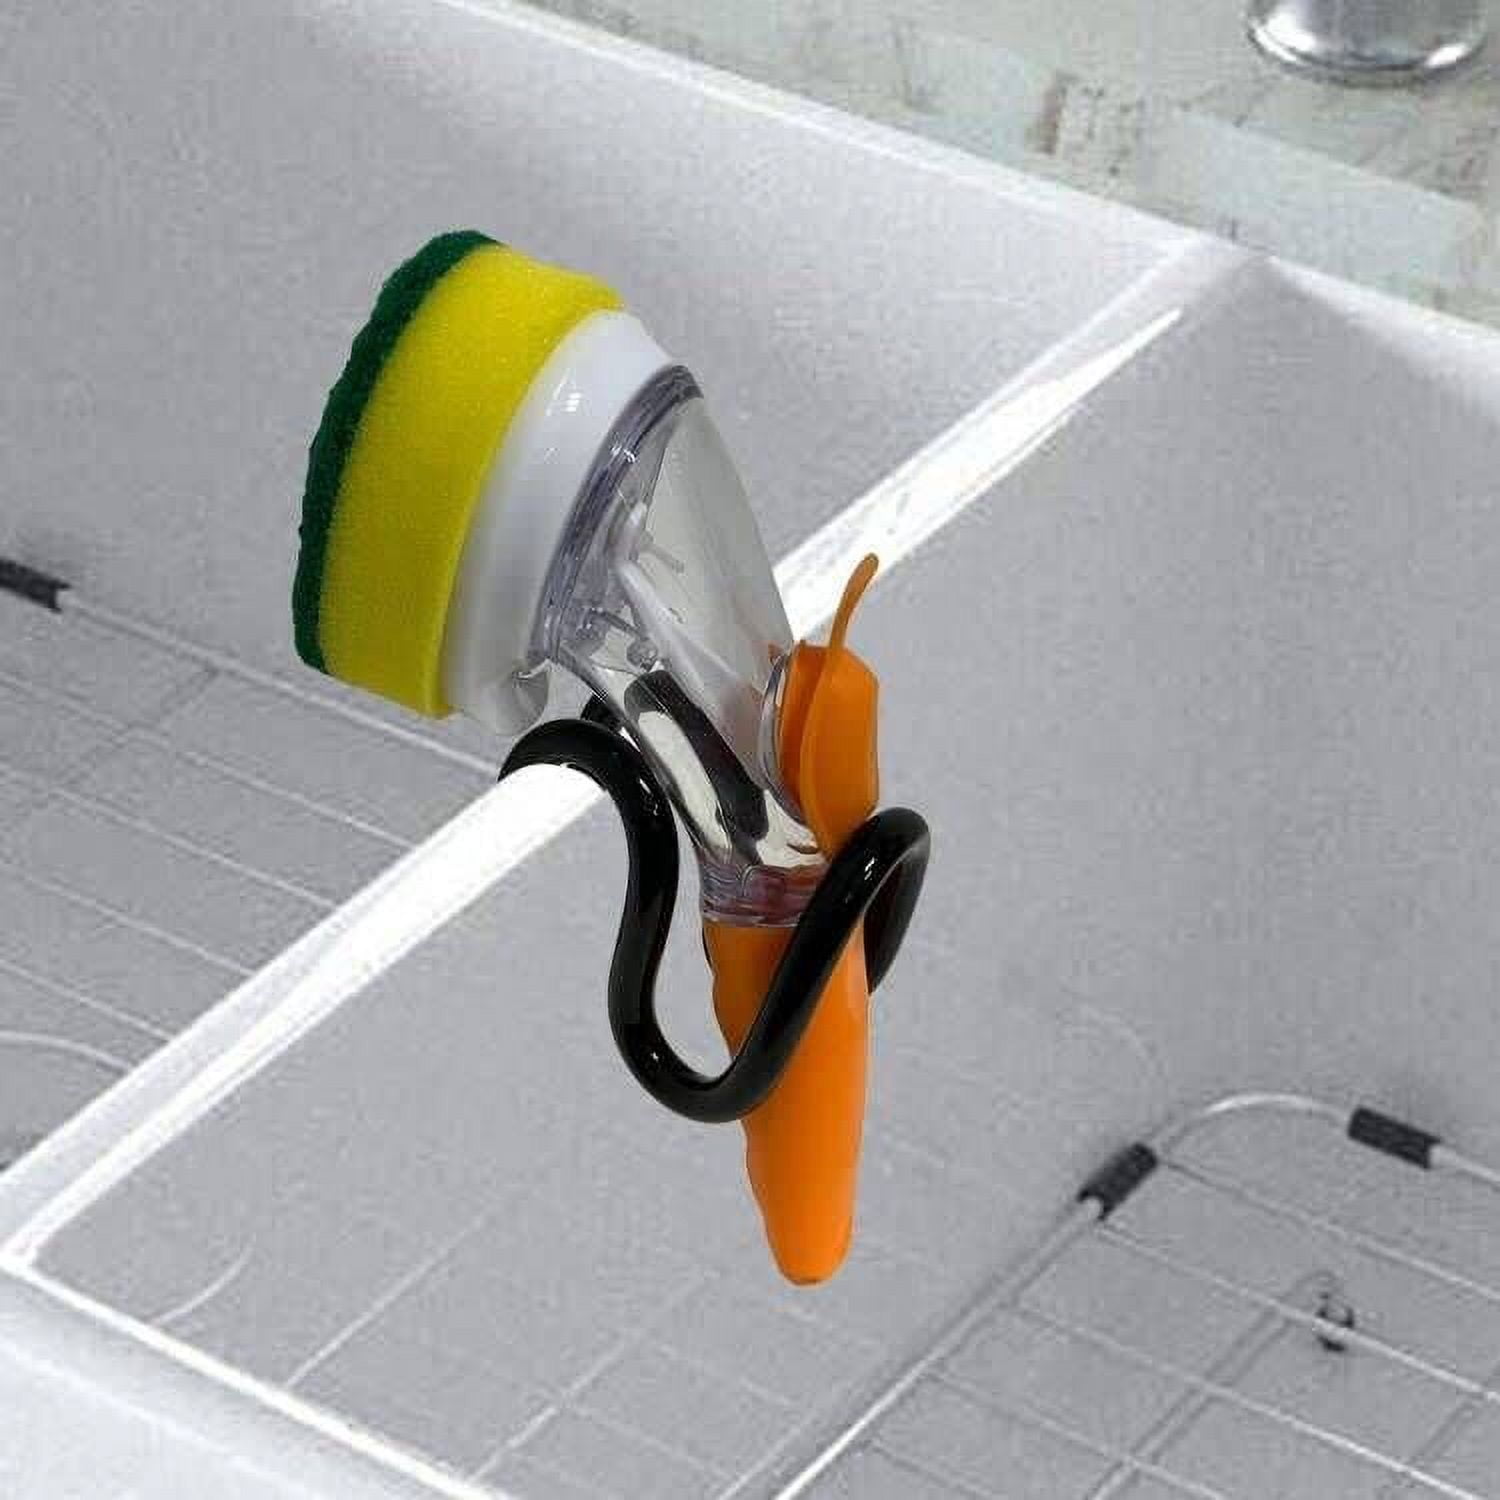 wandDOCK™ - The dishwand drying dock holder that declutters your